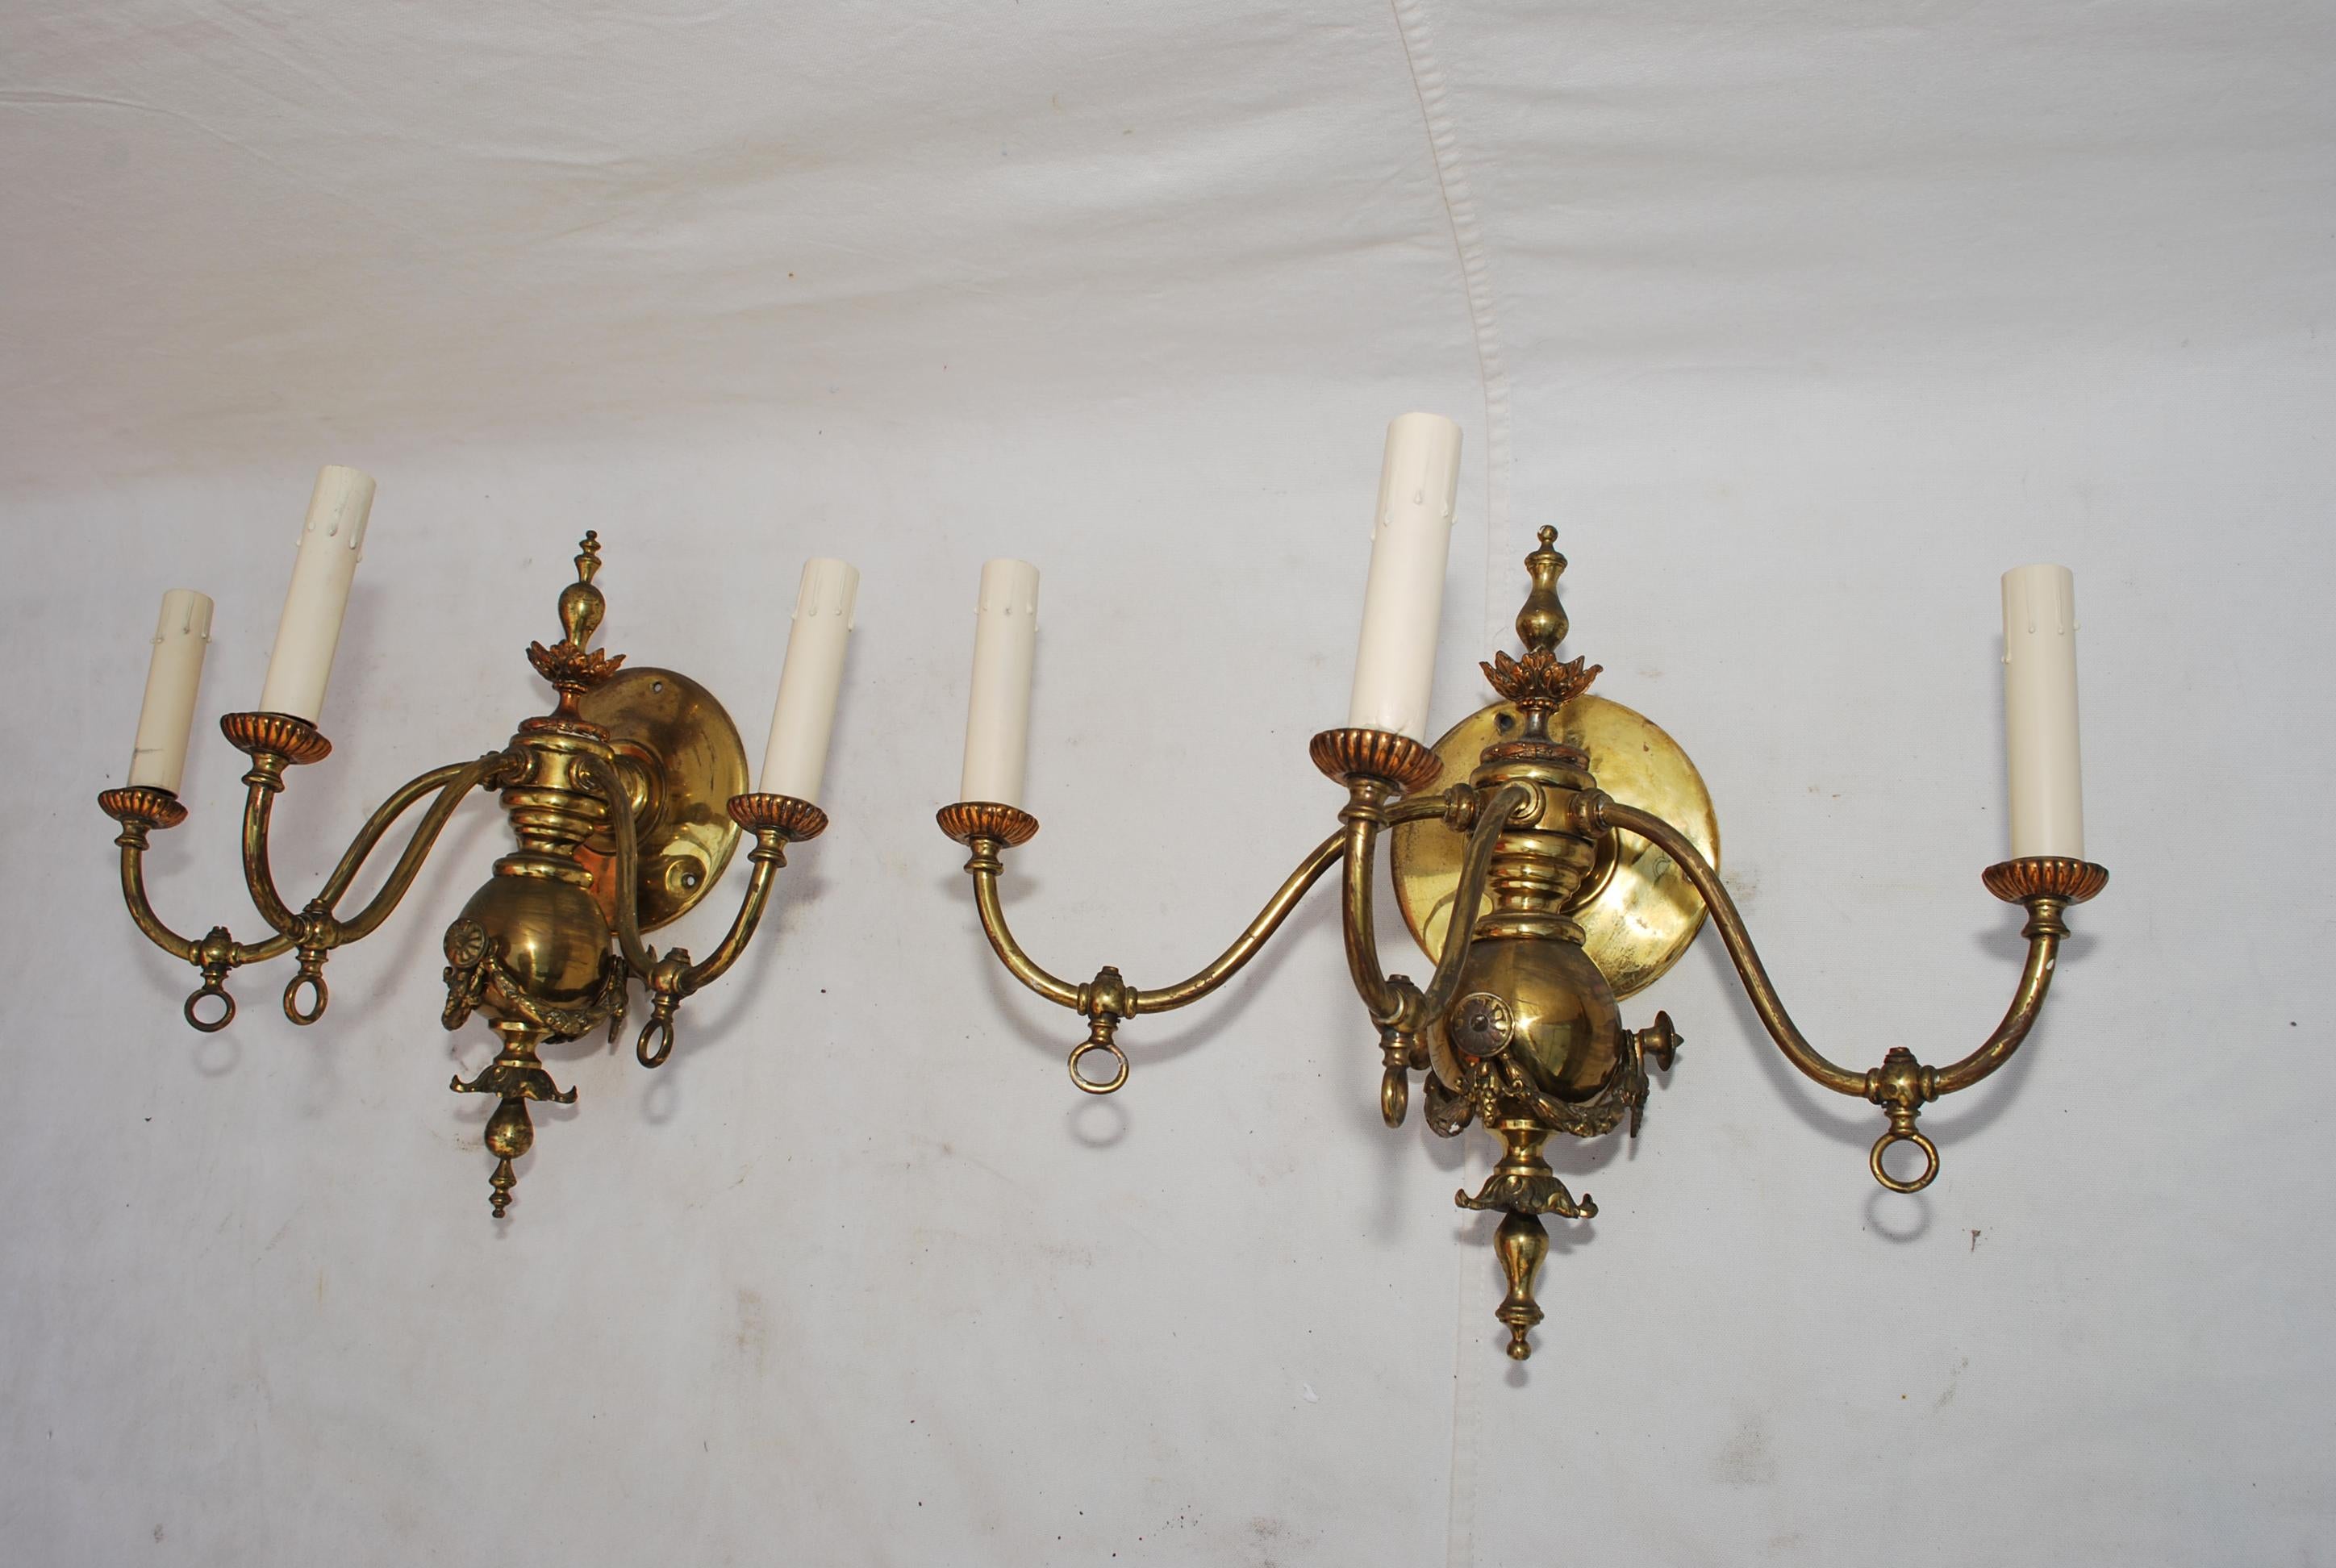 A beautiful pair of late 19th century sconces, originally they were gas, but have been converted to electricity, the patina is much nicer in person, underneath of each arm, you can see the key ring were they used to turn the gas on and off.